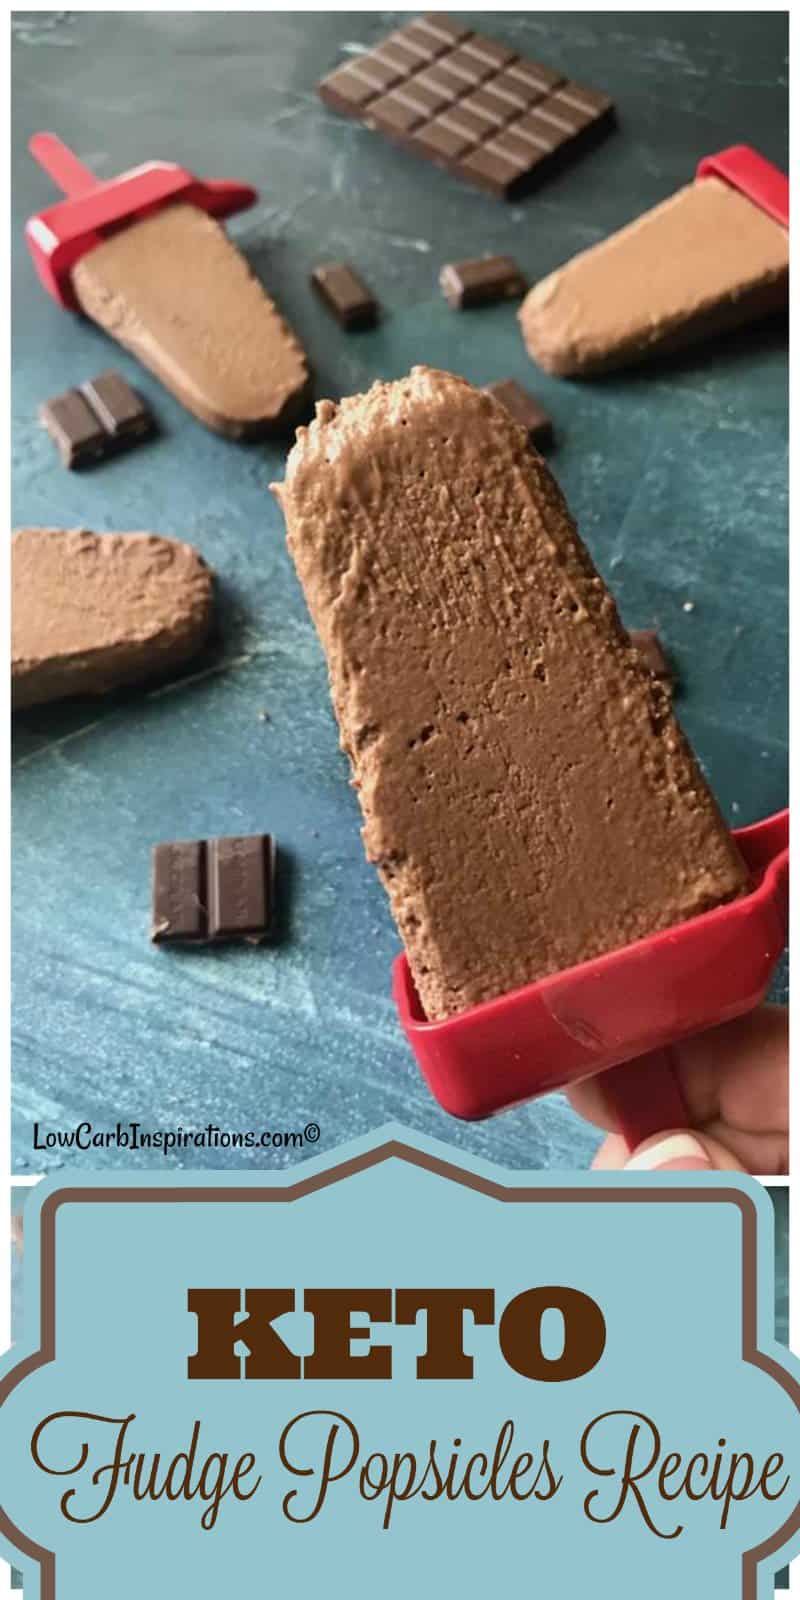 This easy low carb fudge popsicles recipe is the BEST I've ever tried! It's a no sugar dessert recipe that everyone will fall in love with! Perfect recipe for summer time too!